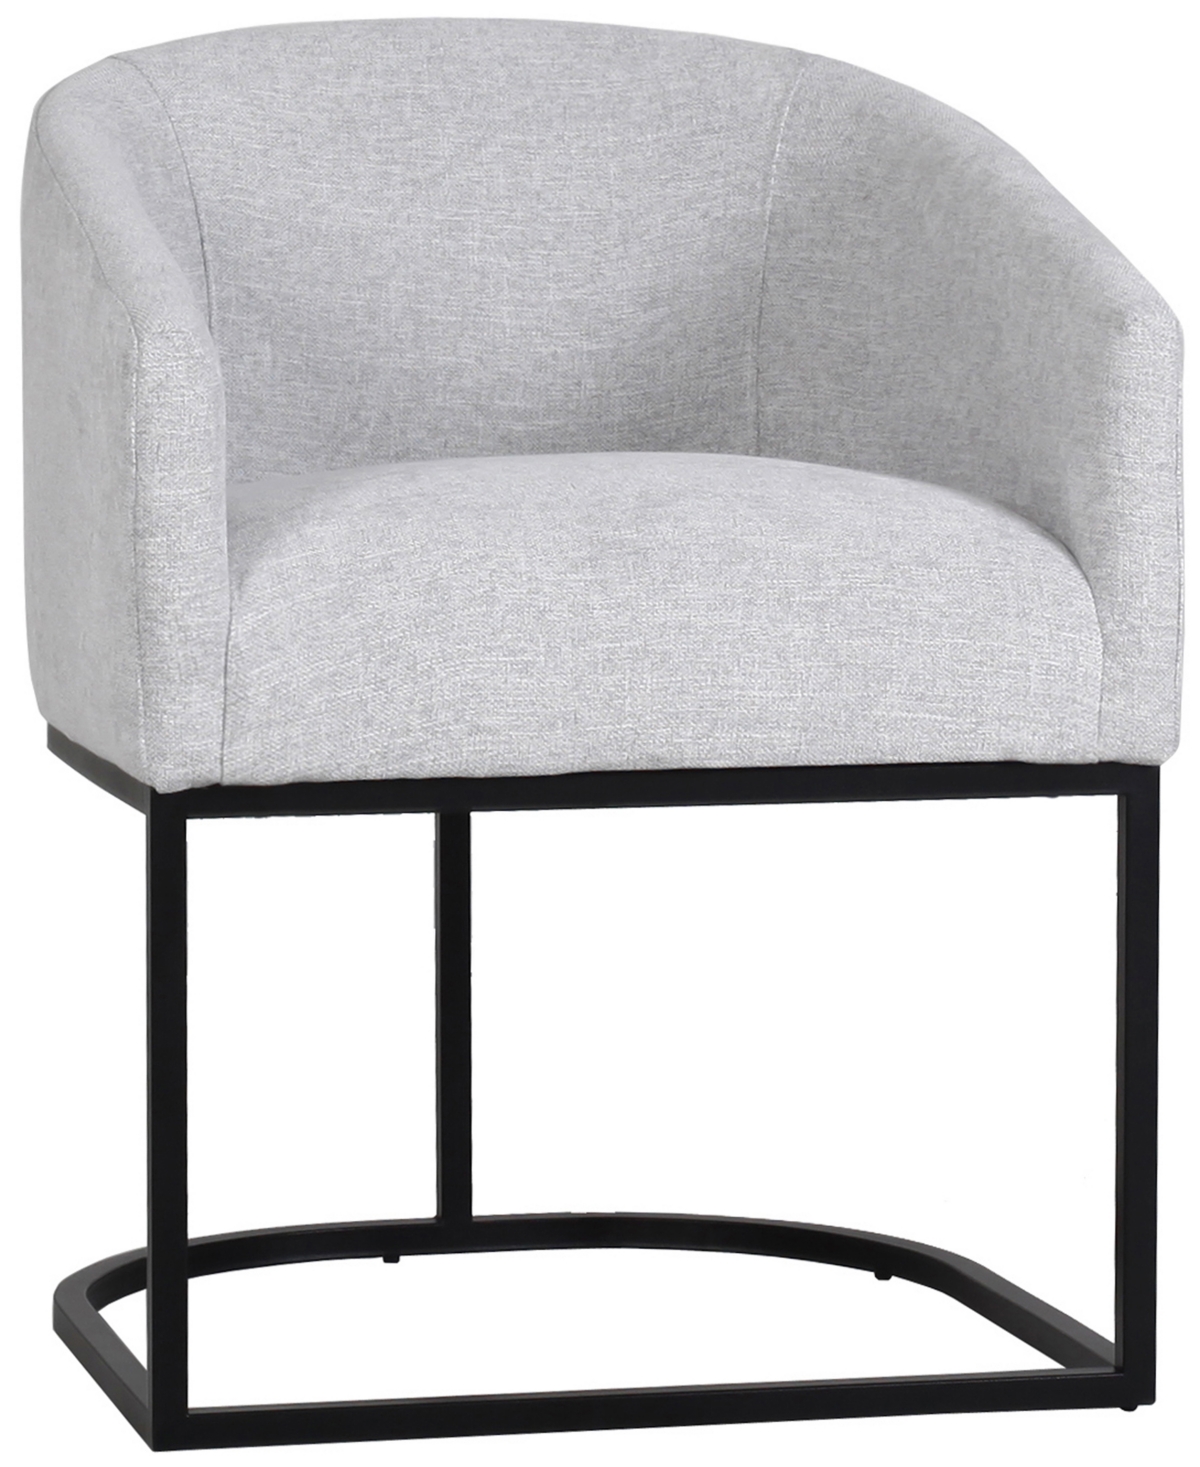 Abbyson Living Jace 29.9" Polyester Upholstered Dining Chair In Light Gray